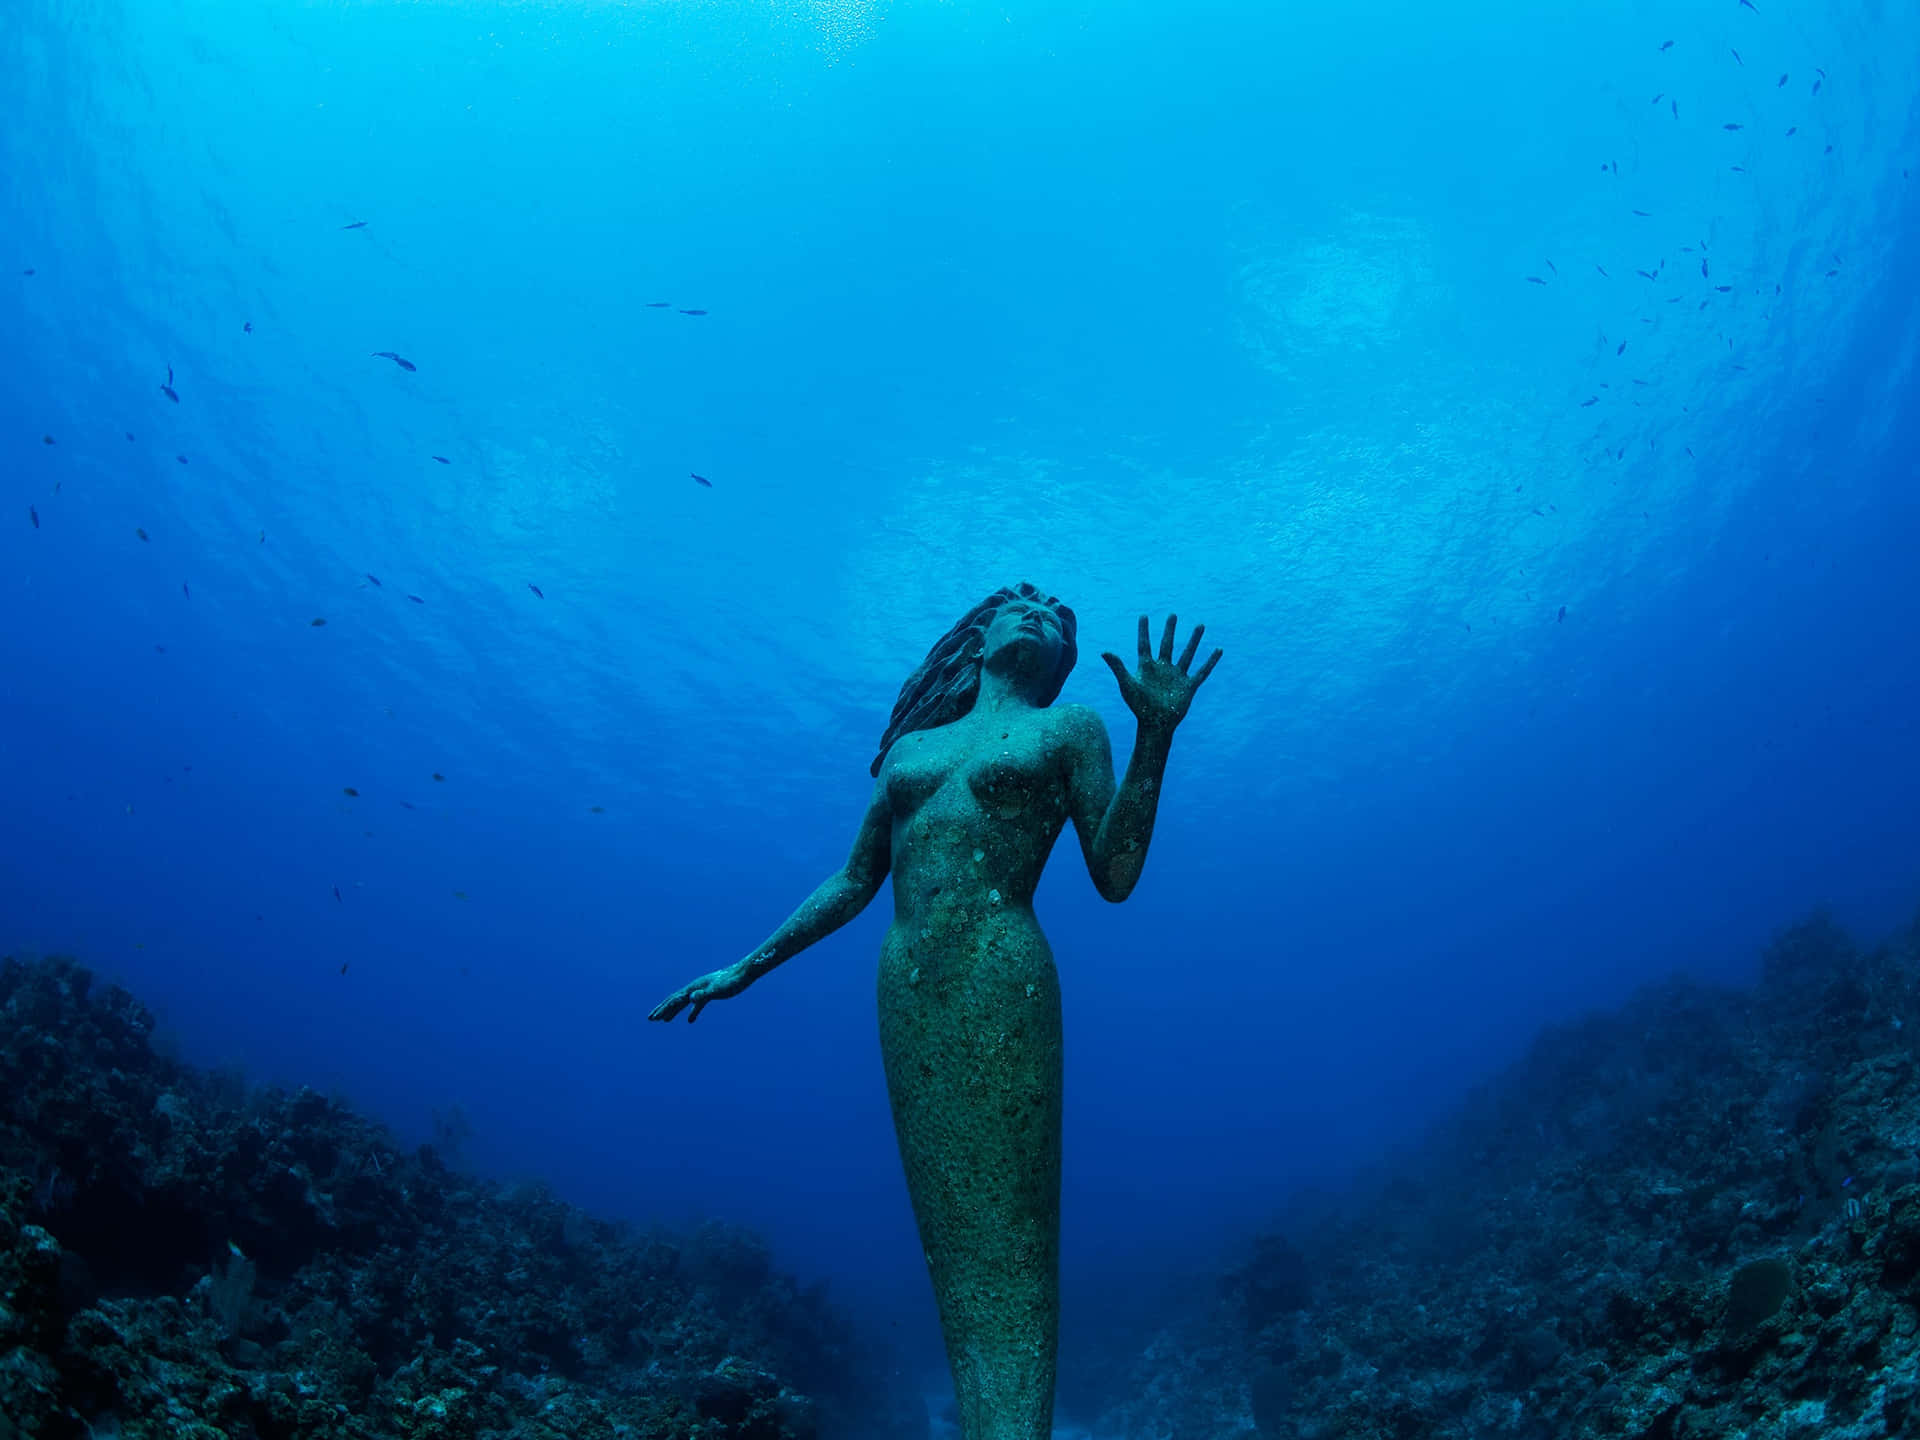 Spend Time in the Beauty and Majesty of the Underwater Ocean